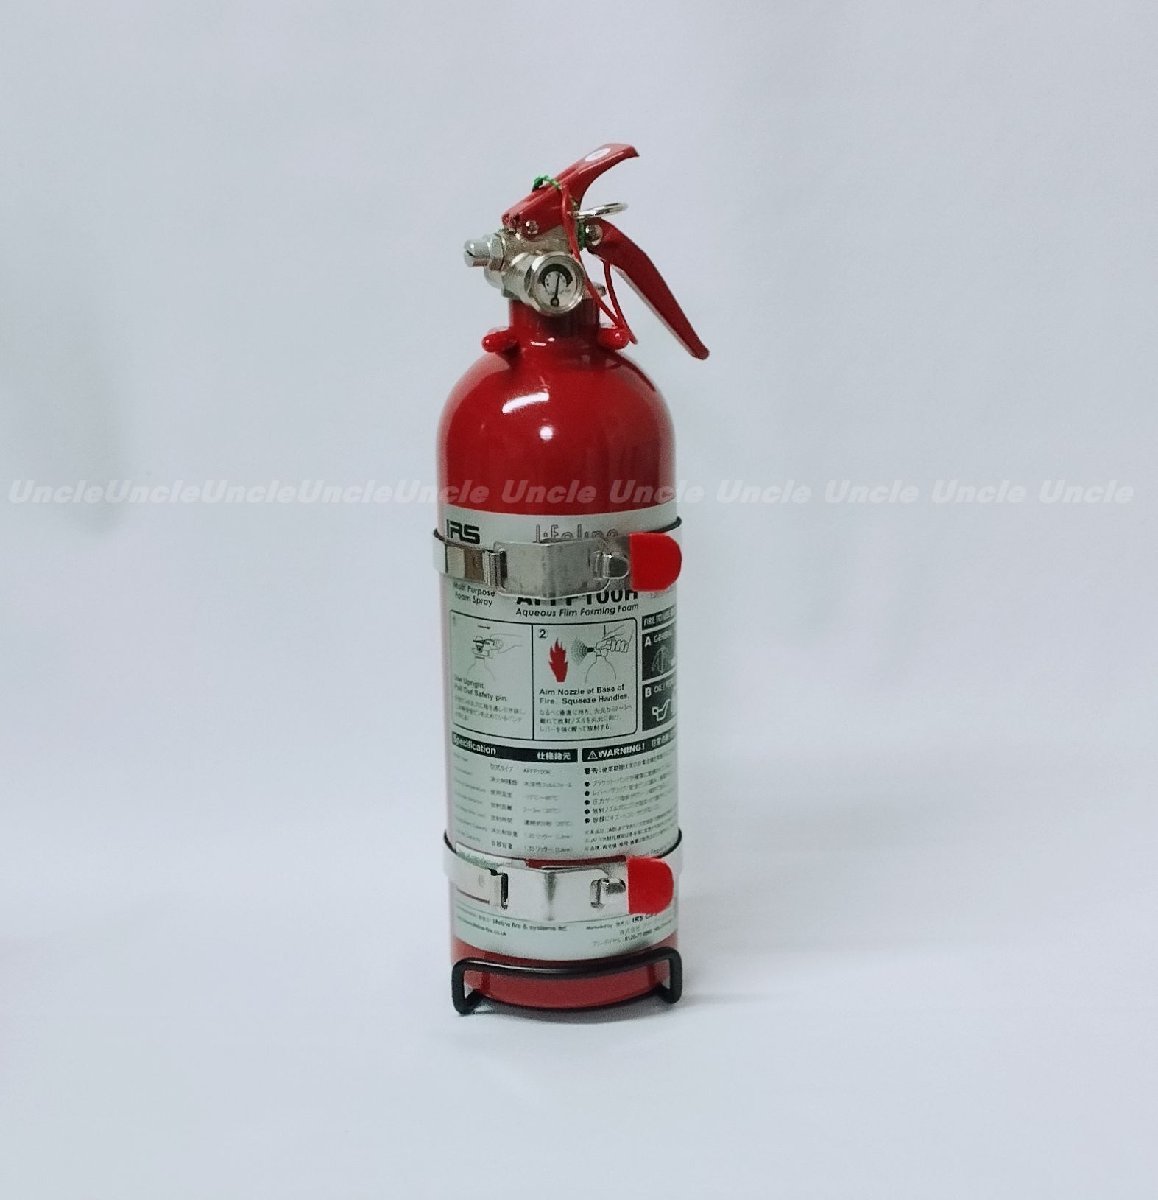 2023 year manufacture AFFF100H life line car manual fire extinguisher 1.0L